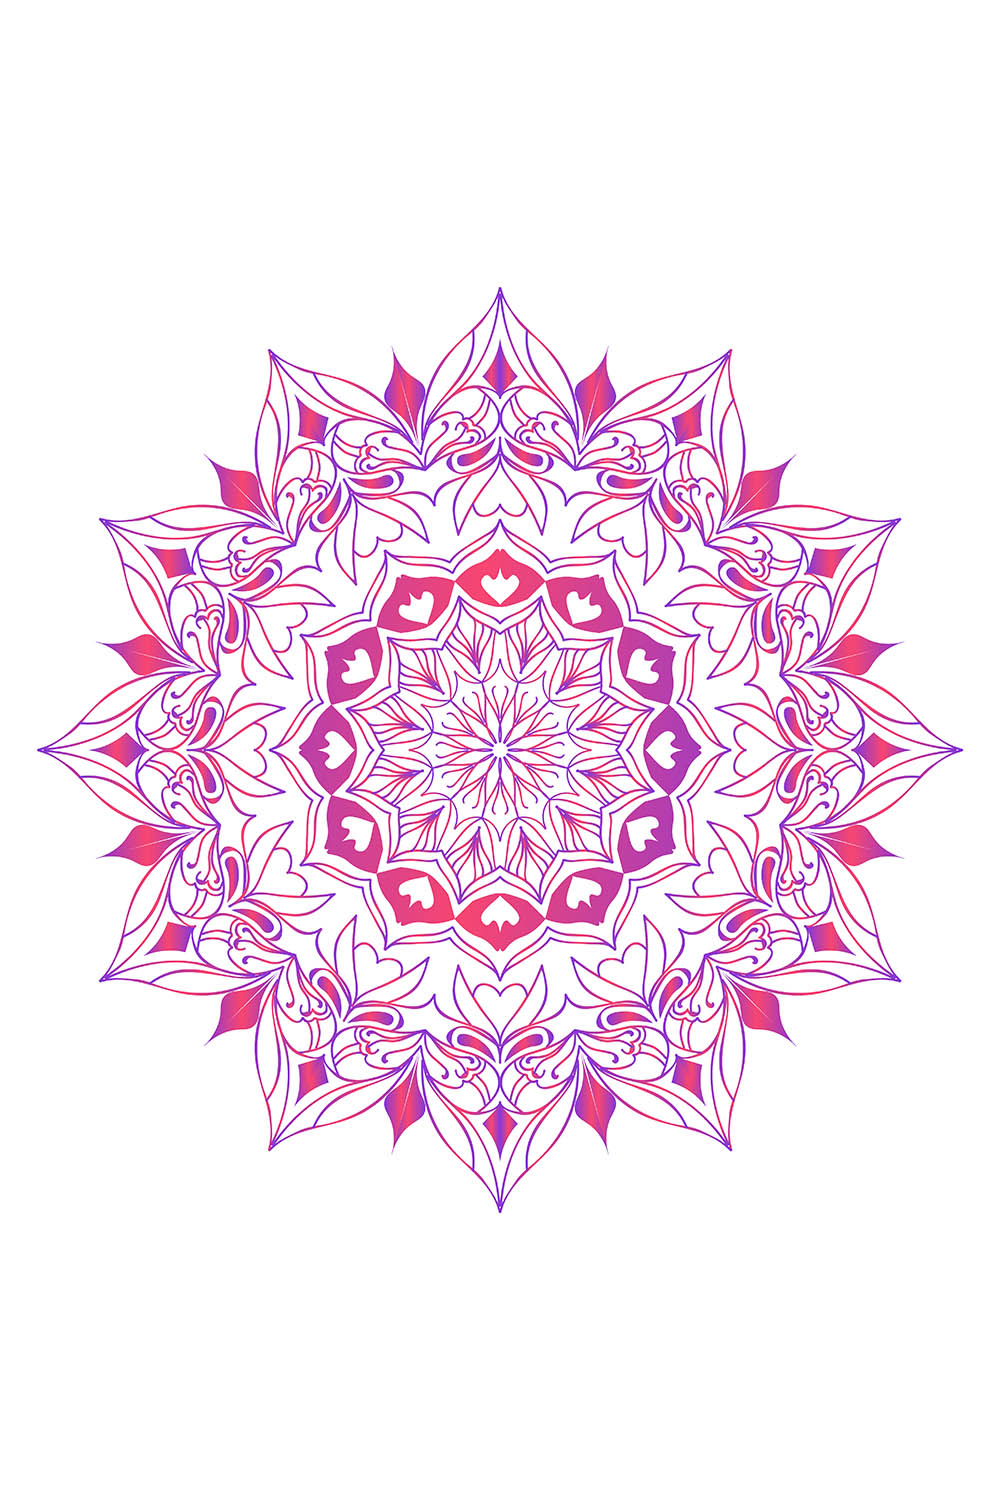 Luxury mandala of beautiful flowers abstract Islamic decorative mosque tile design pink color background pattern pinterest preview image.